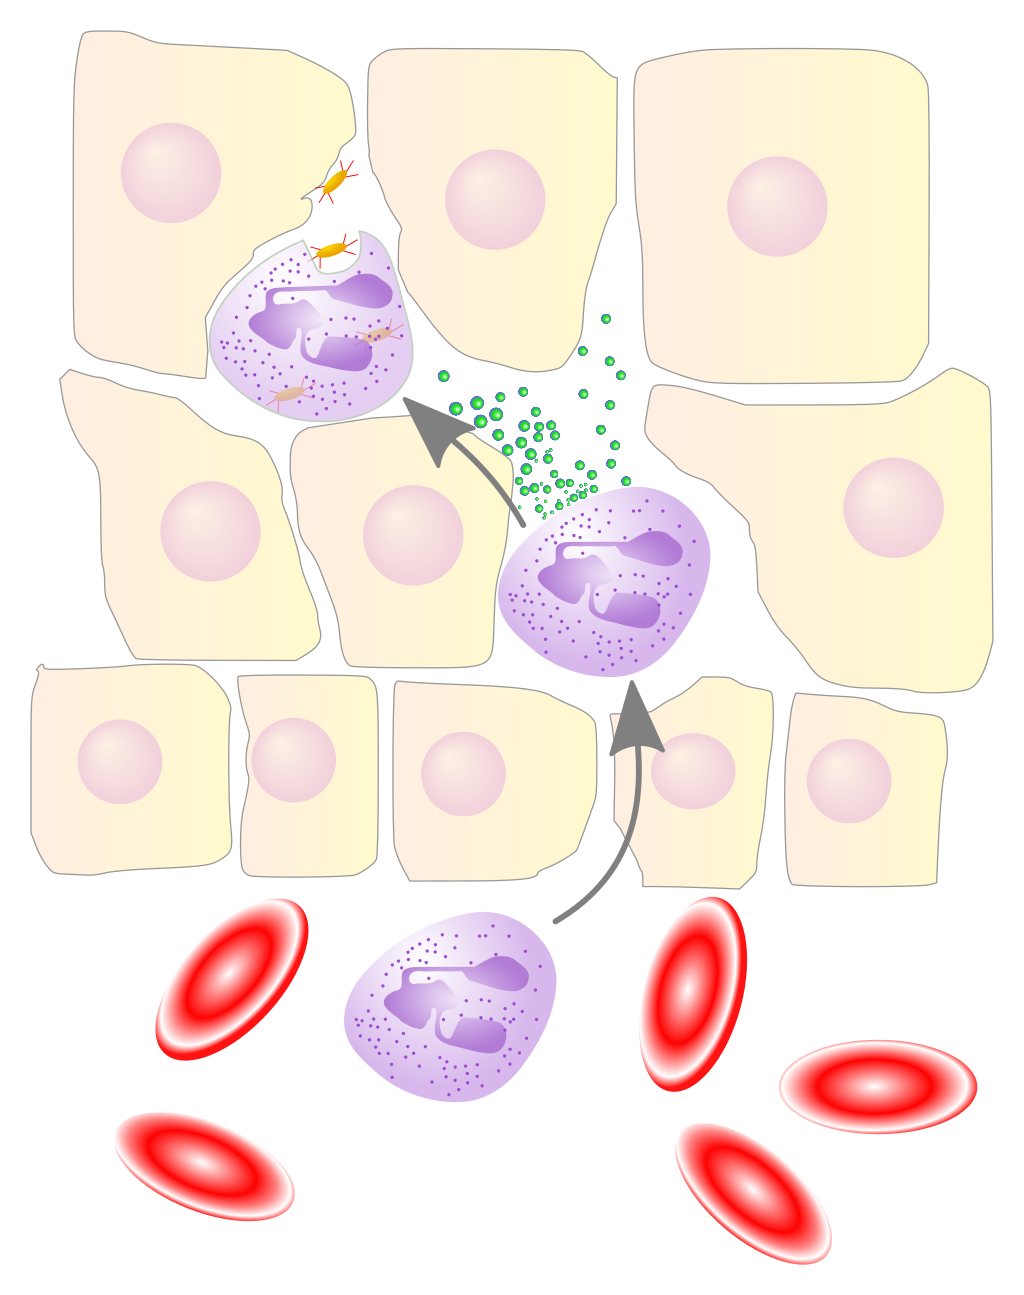 Neutrophils Role In Acute Inflammation